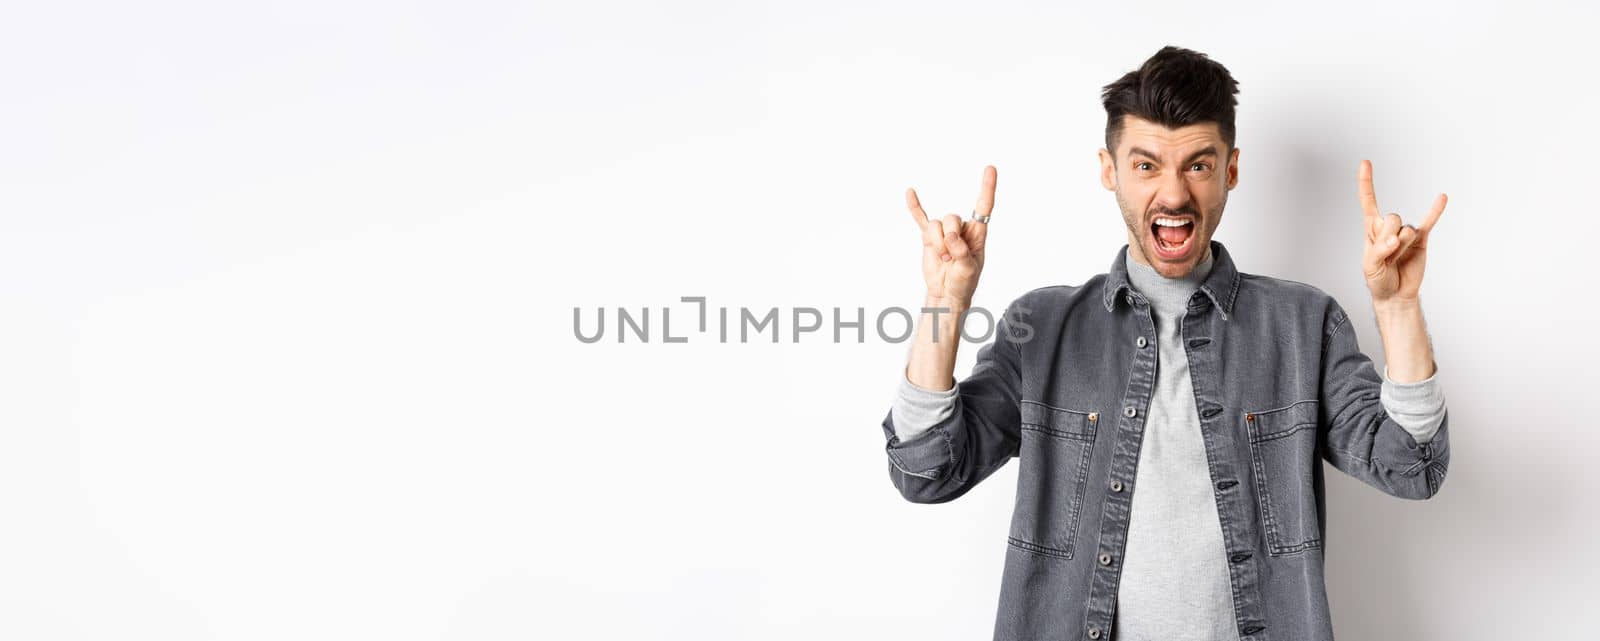 Rock on. Sassy young man shouting and showing heavy metal horns sign, attend awesome concert, having fun, standing on white background.